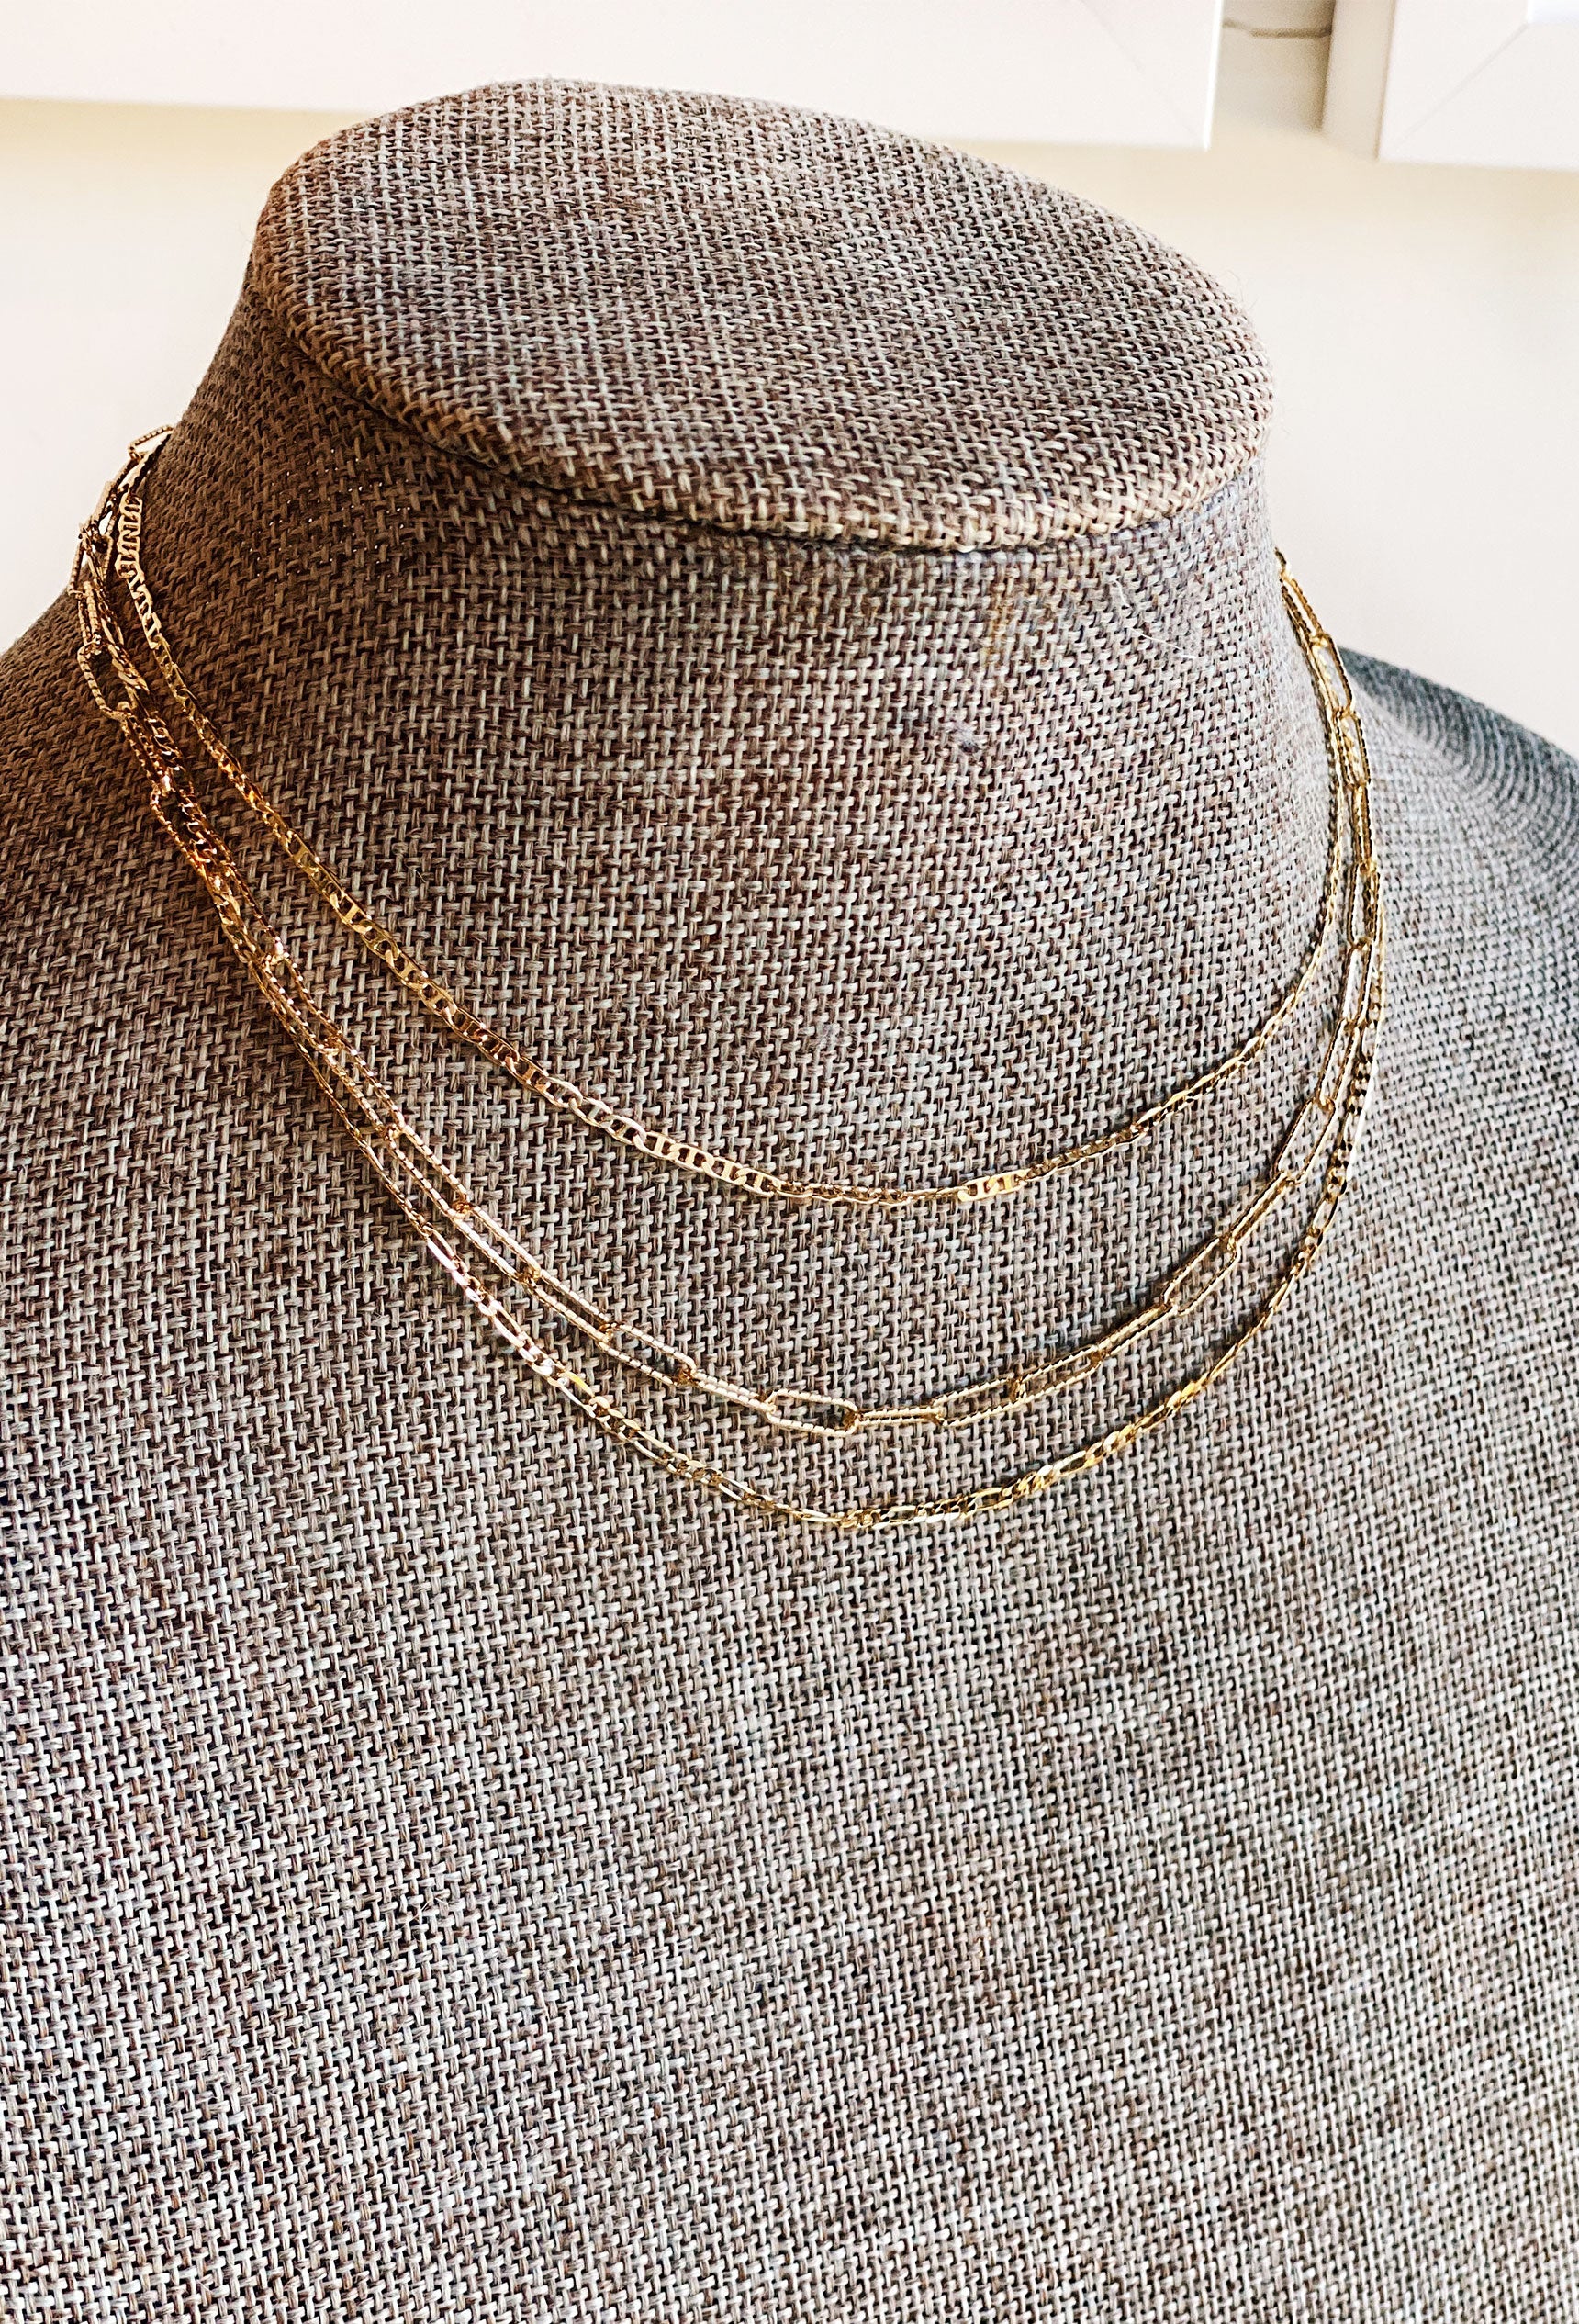 Columbus Textured Chain Link Necklace, set of 3 chains all connected, lobster clasp 